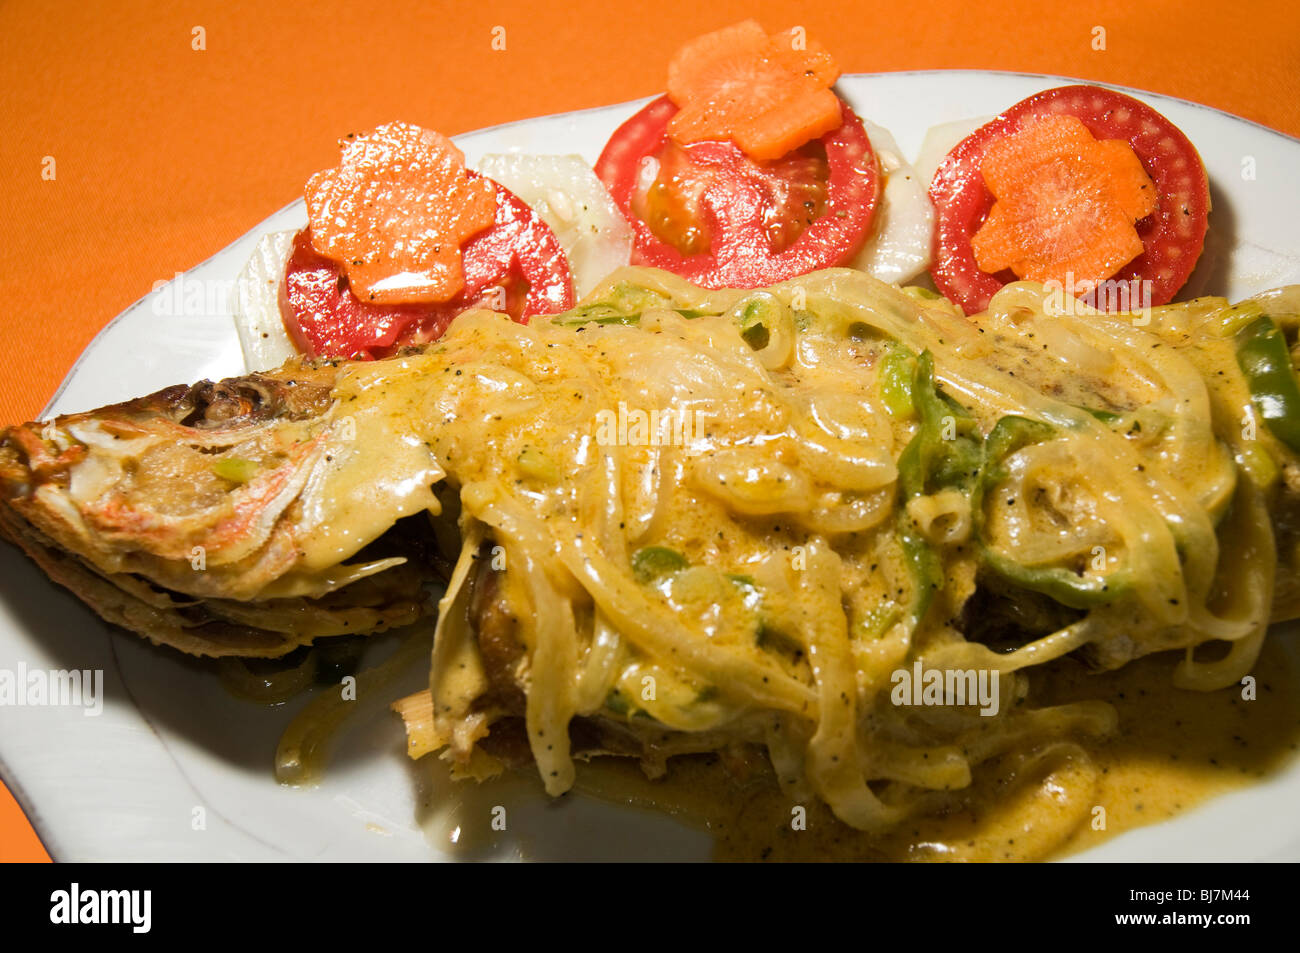 caribena pescado caribbean style kingfish whole cooked with coconut cream sauce and onions and vegetables and nicaraguan salad a Stock Photo